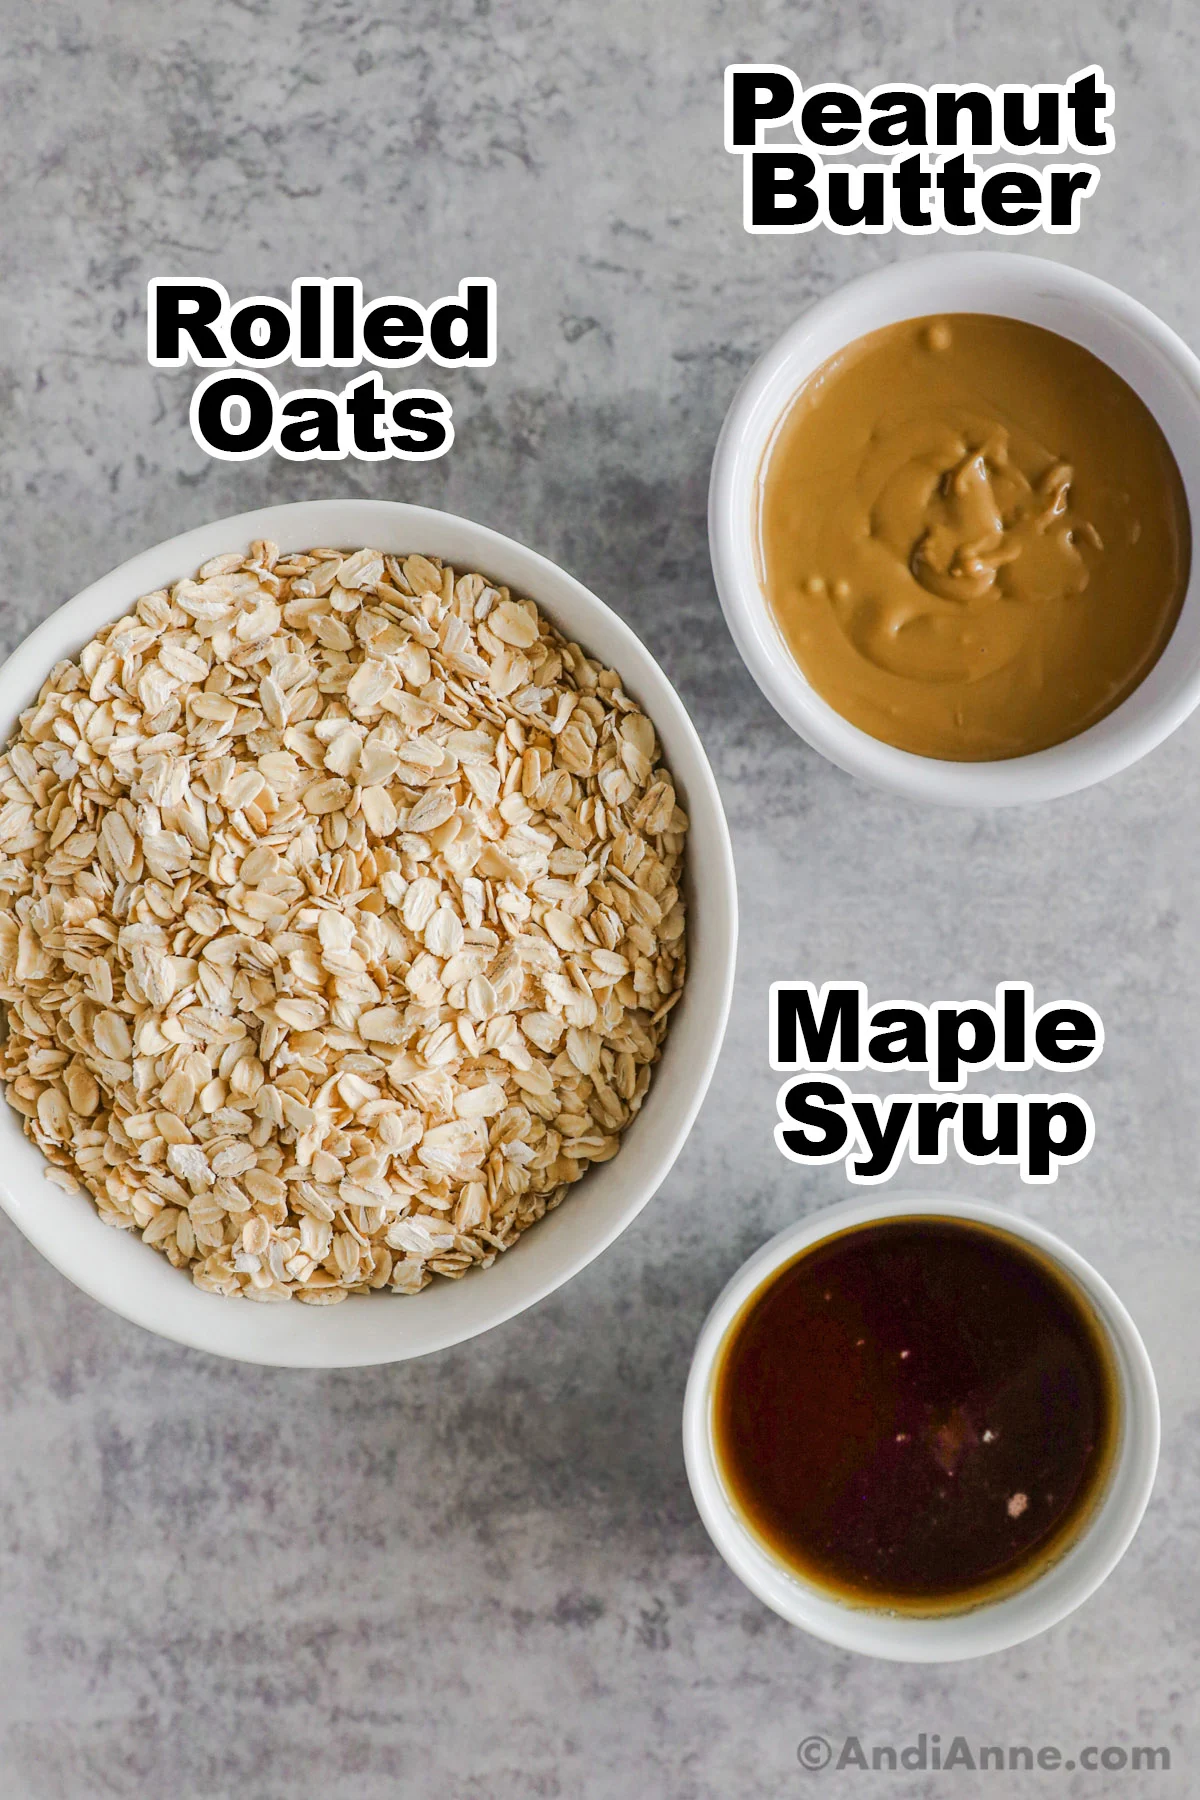 Bowls of rolled oats, peanut butter and maple syrup.